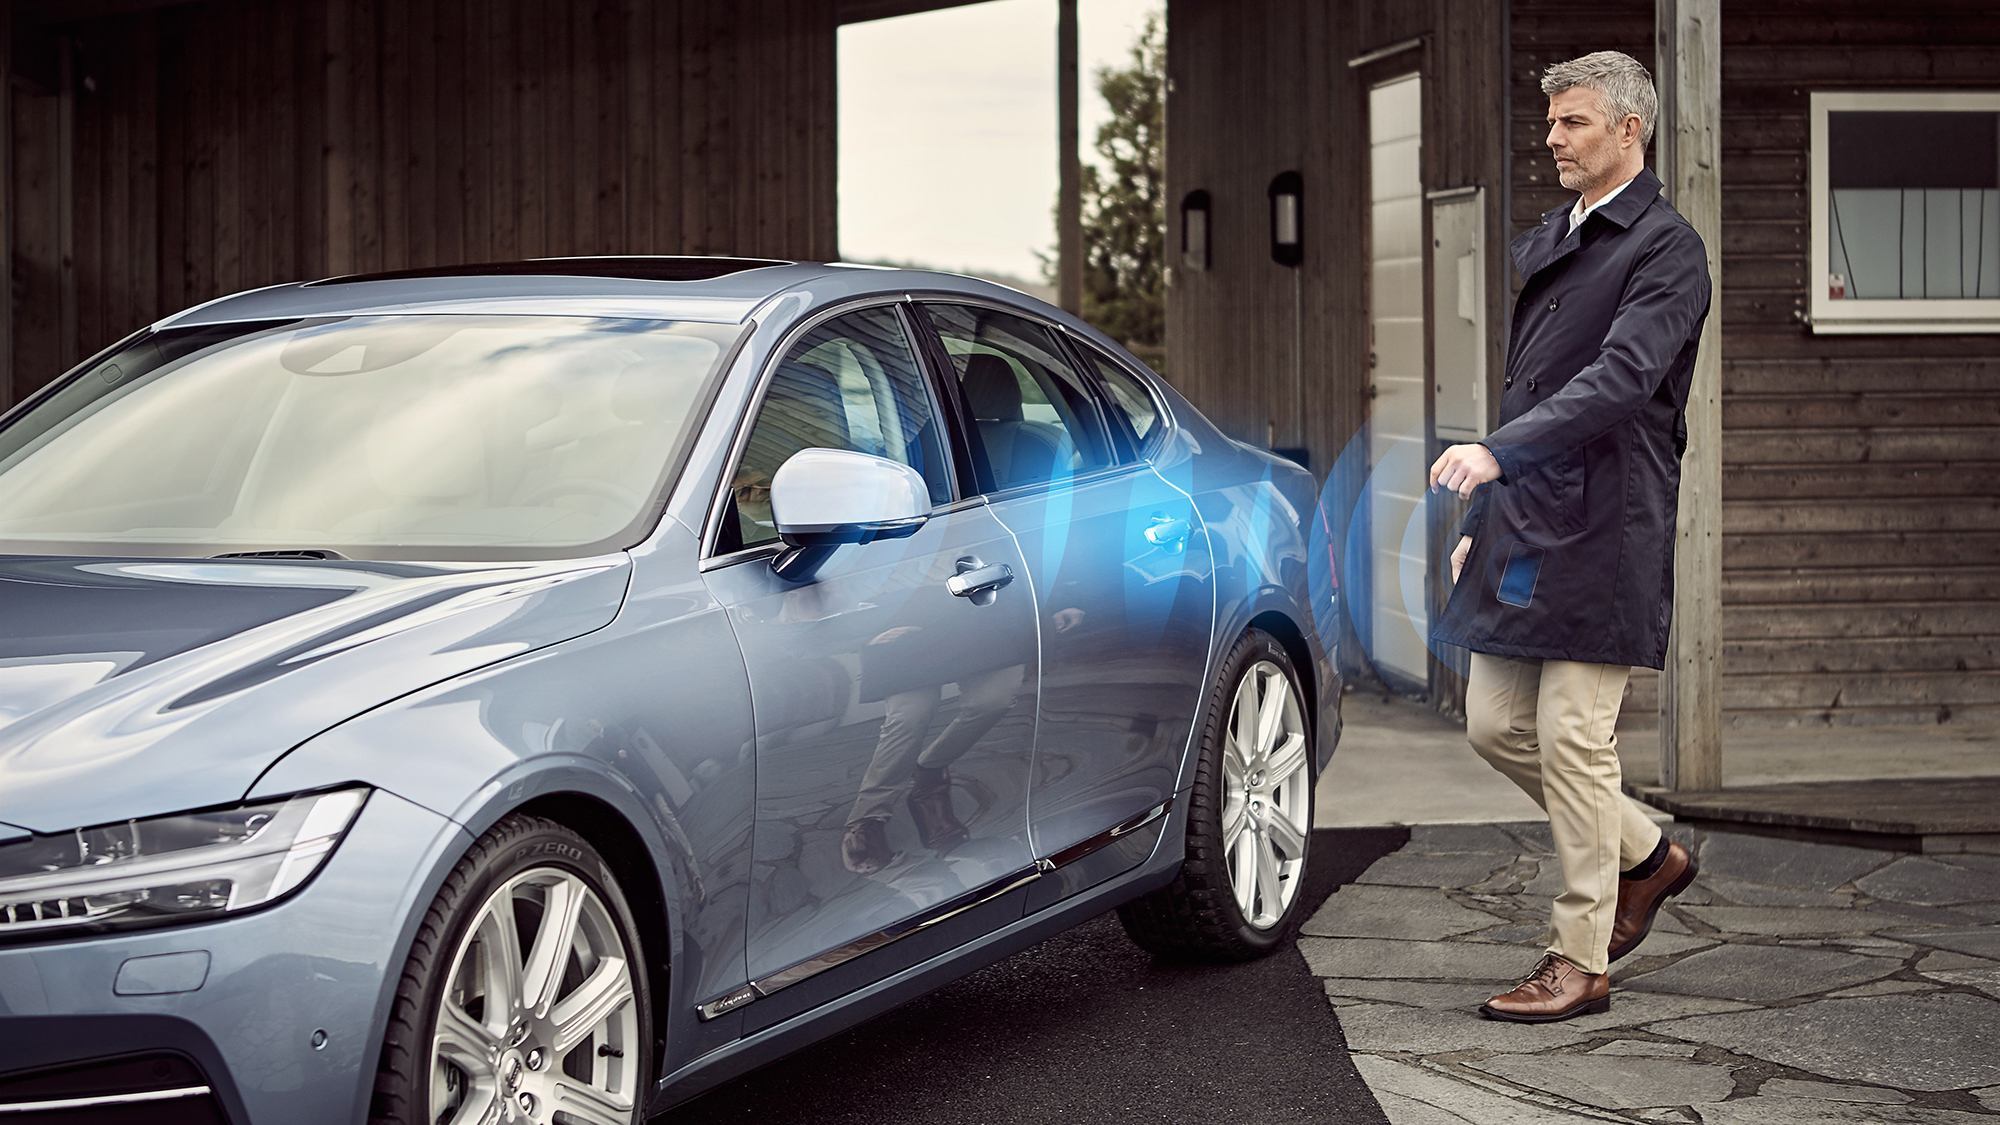 Volvo Brags About Making The First Car That Doesn’t Need Keys